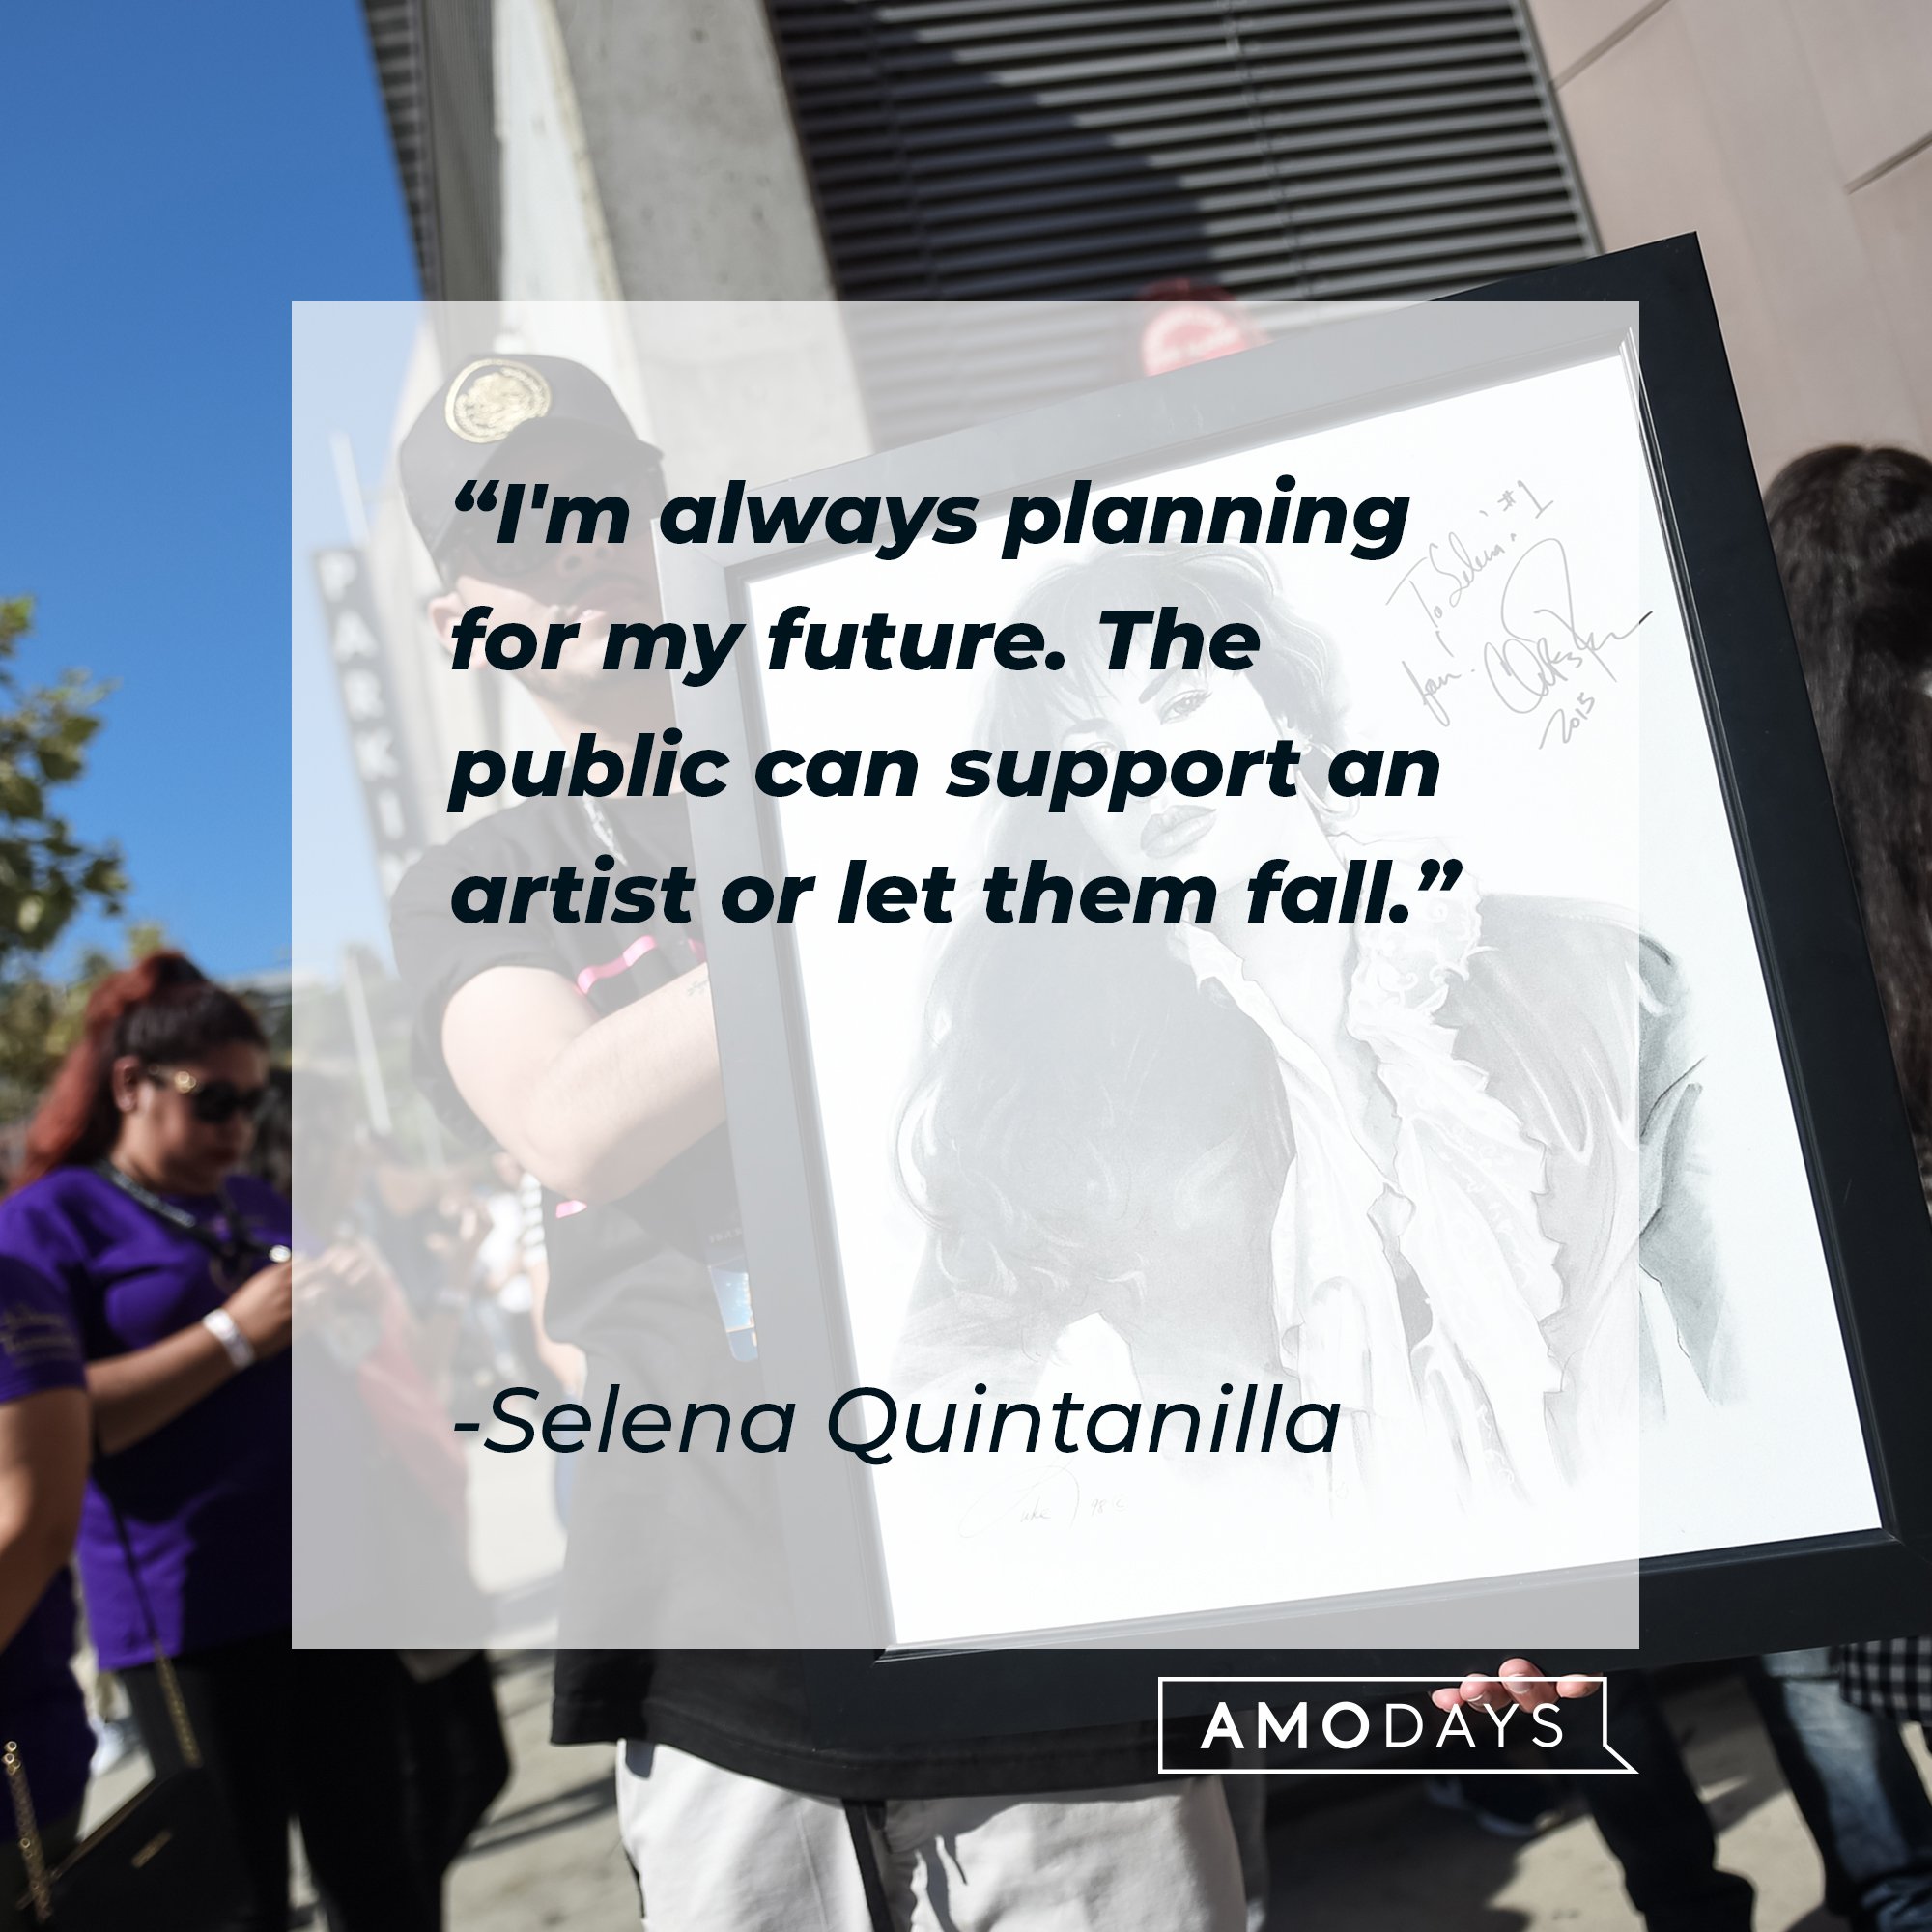 Selena Quintanilla's quote: "I'm always planning for my future. The public can support an artist or let them fall."  | Image: AmoDays